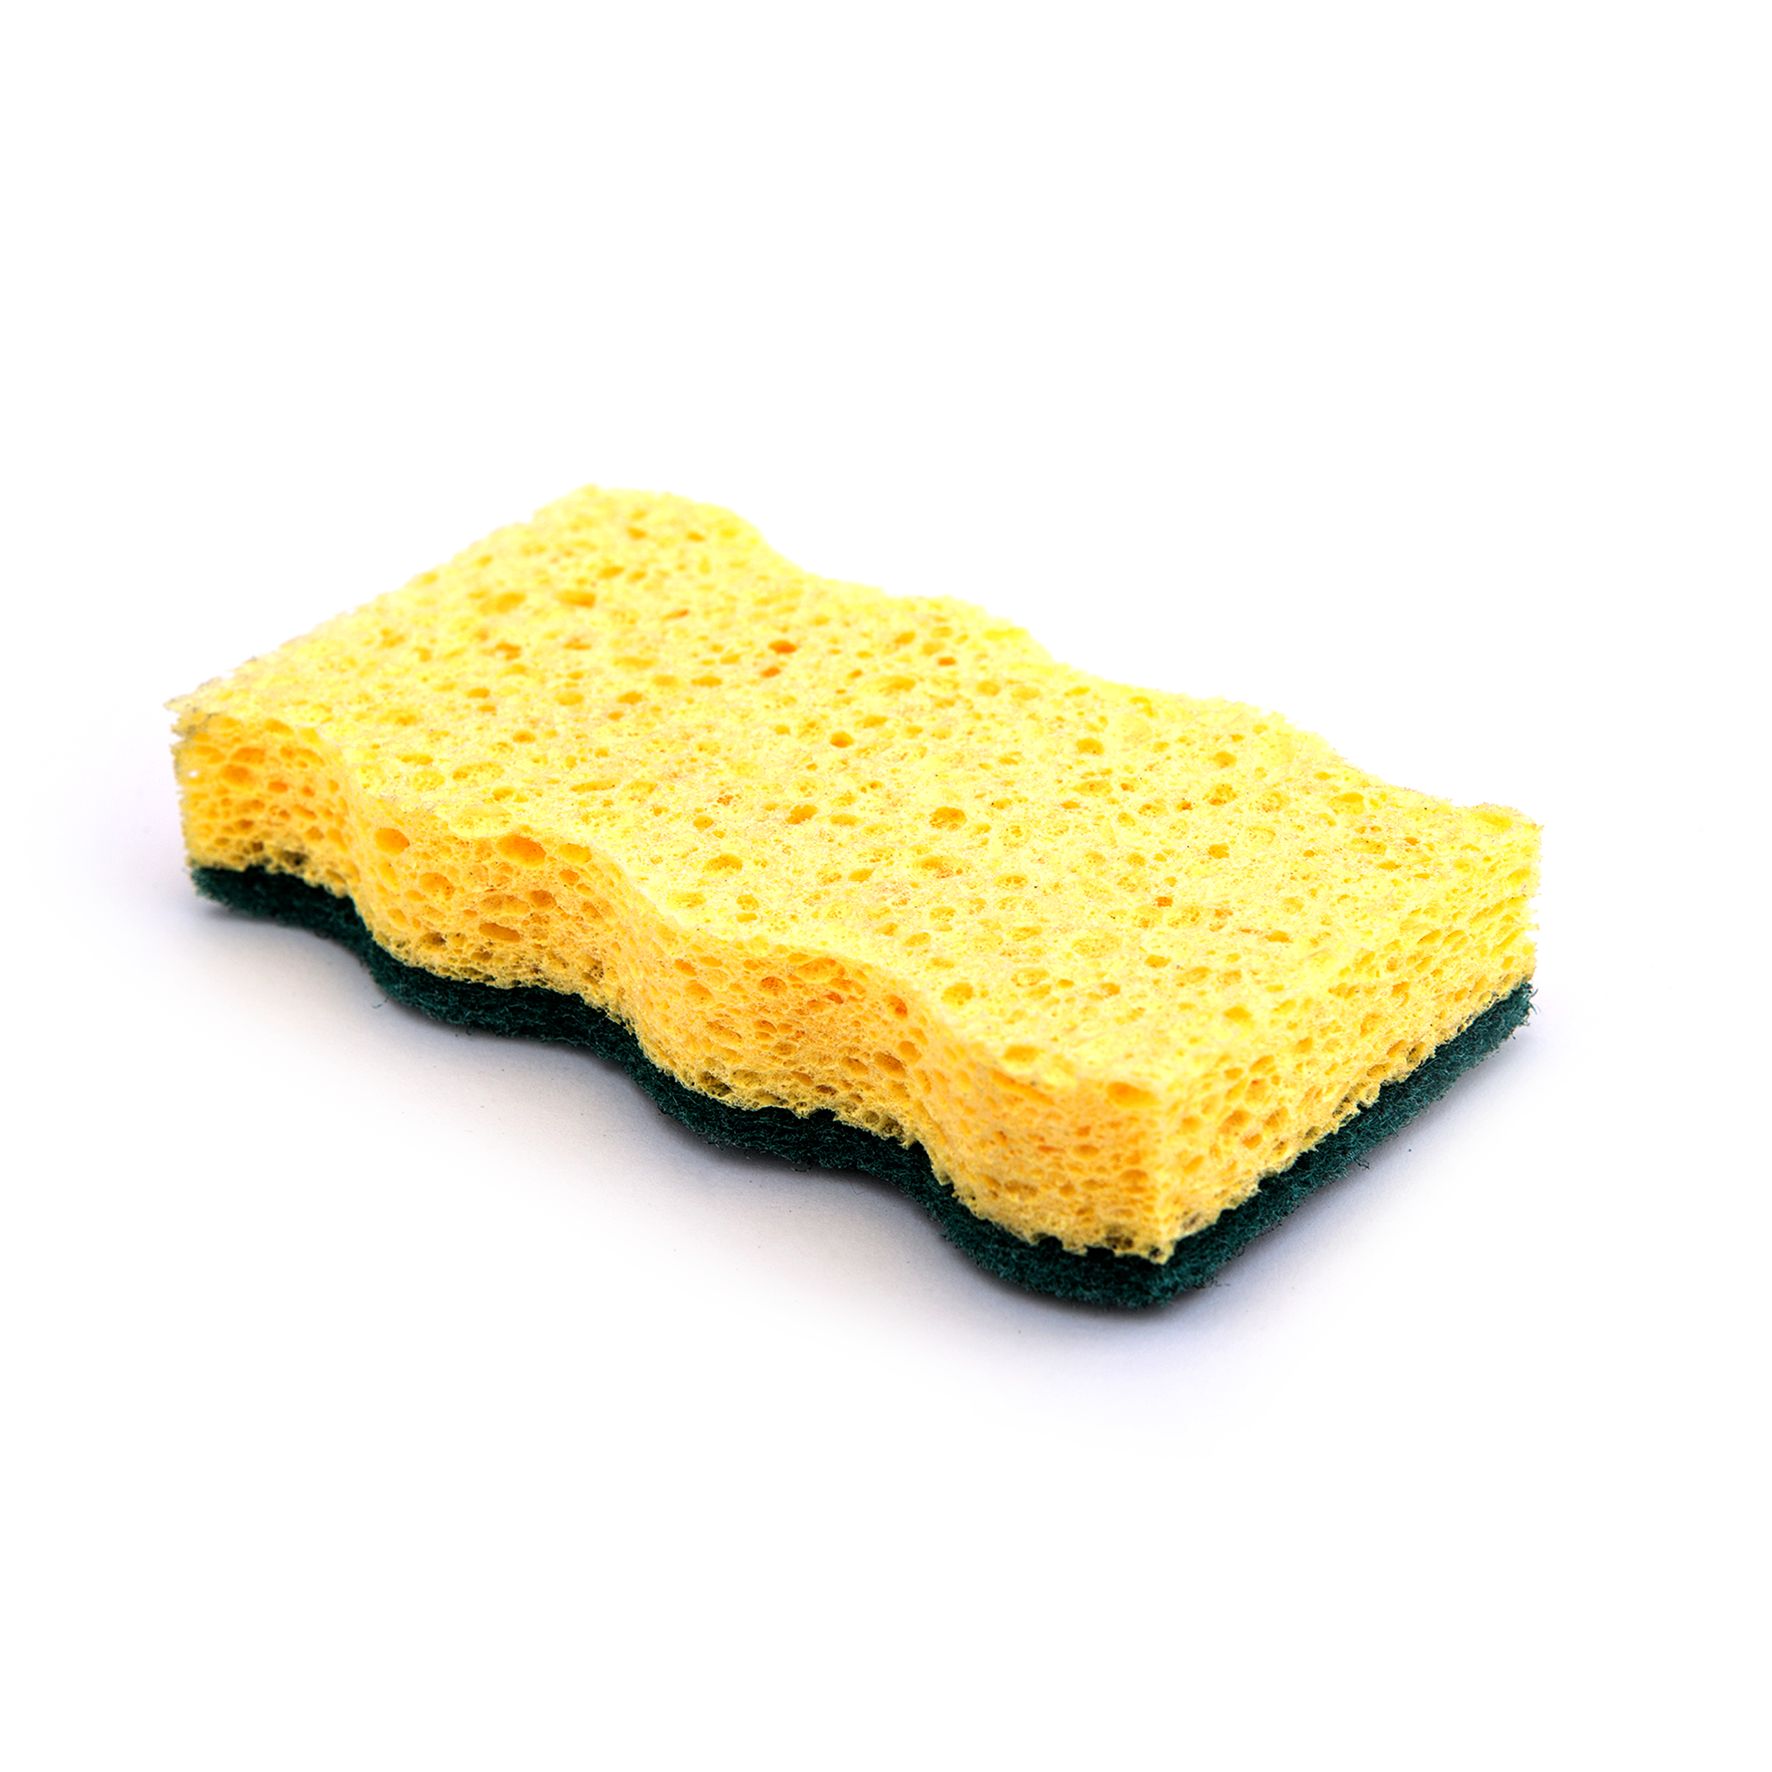 What is the principle of sponge cleaning?